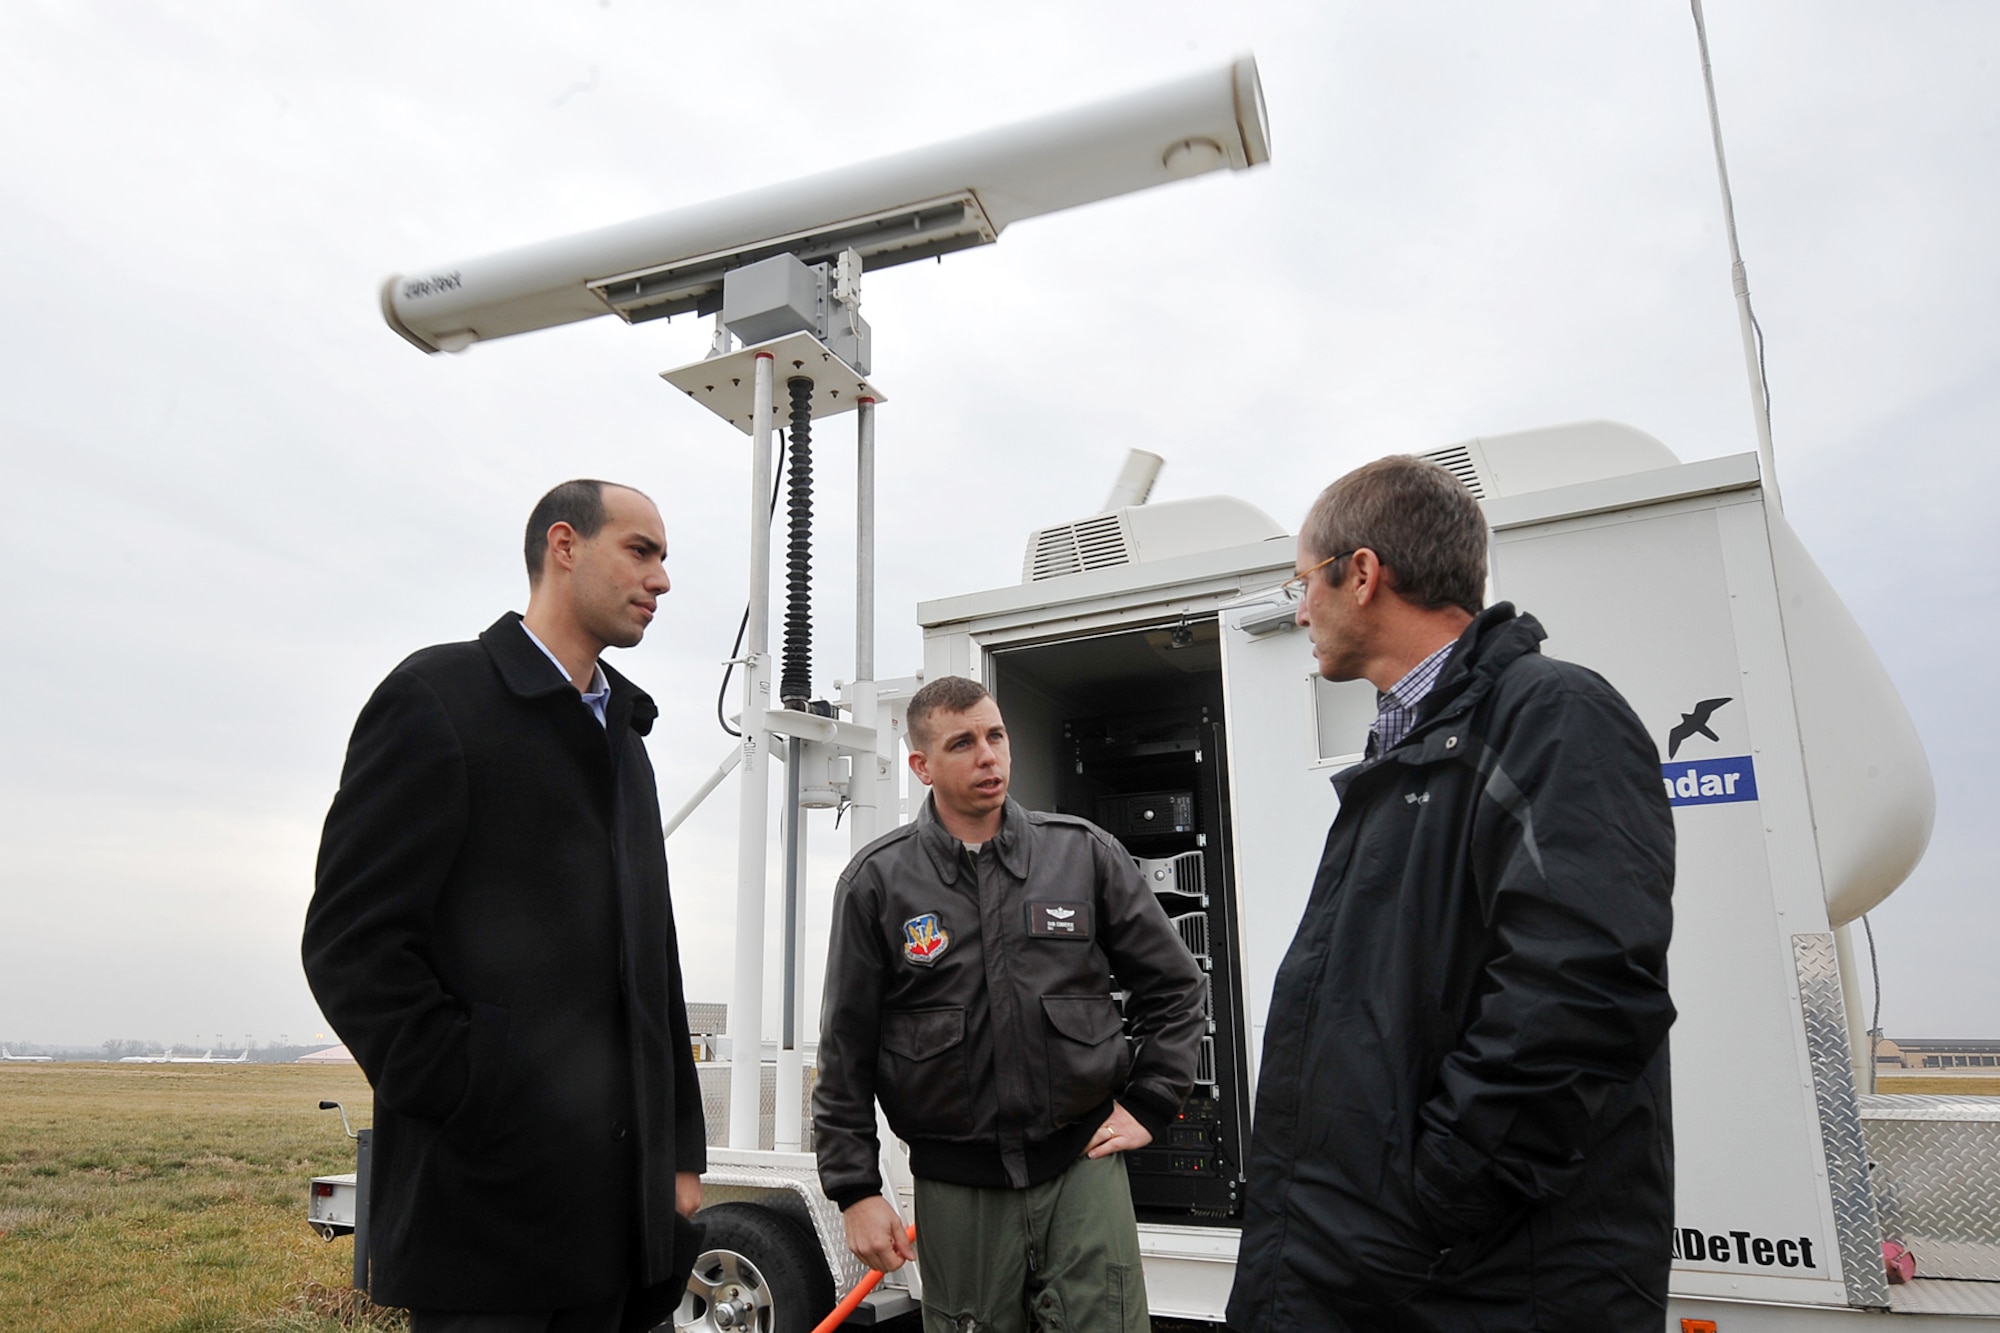 Israeli Air Force Majors Zeev Sorek and Oded Ovadia speak with U.S. Air Force Maj. Daniel Converse, 55th Wing chief of flight safety, during a briefing outside of the MERLIN Aircraft Birdstrike Avoidance Radar System Dec. 19 at Offutt AFB, Neb. The Israeli Air Force officers visited various areas during their visit, including the radar site, to learn more about the base’s BASH program. (U.S. Air Force Photo by Charles Haymond/Released)